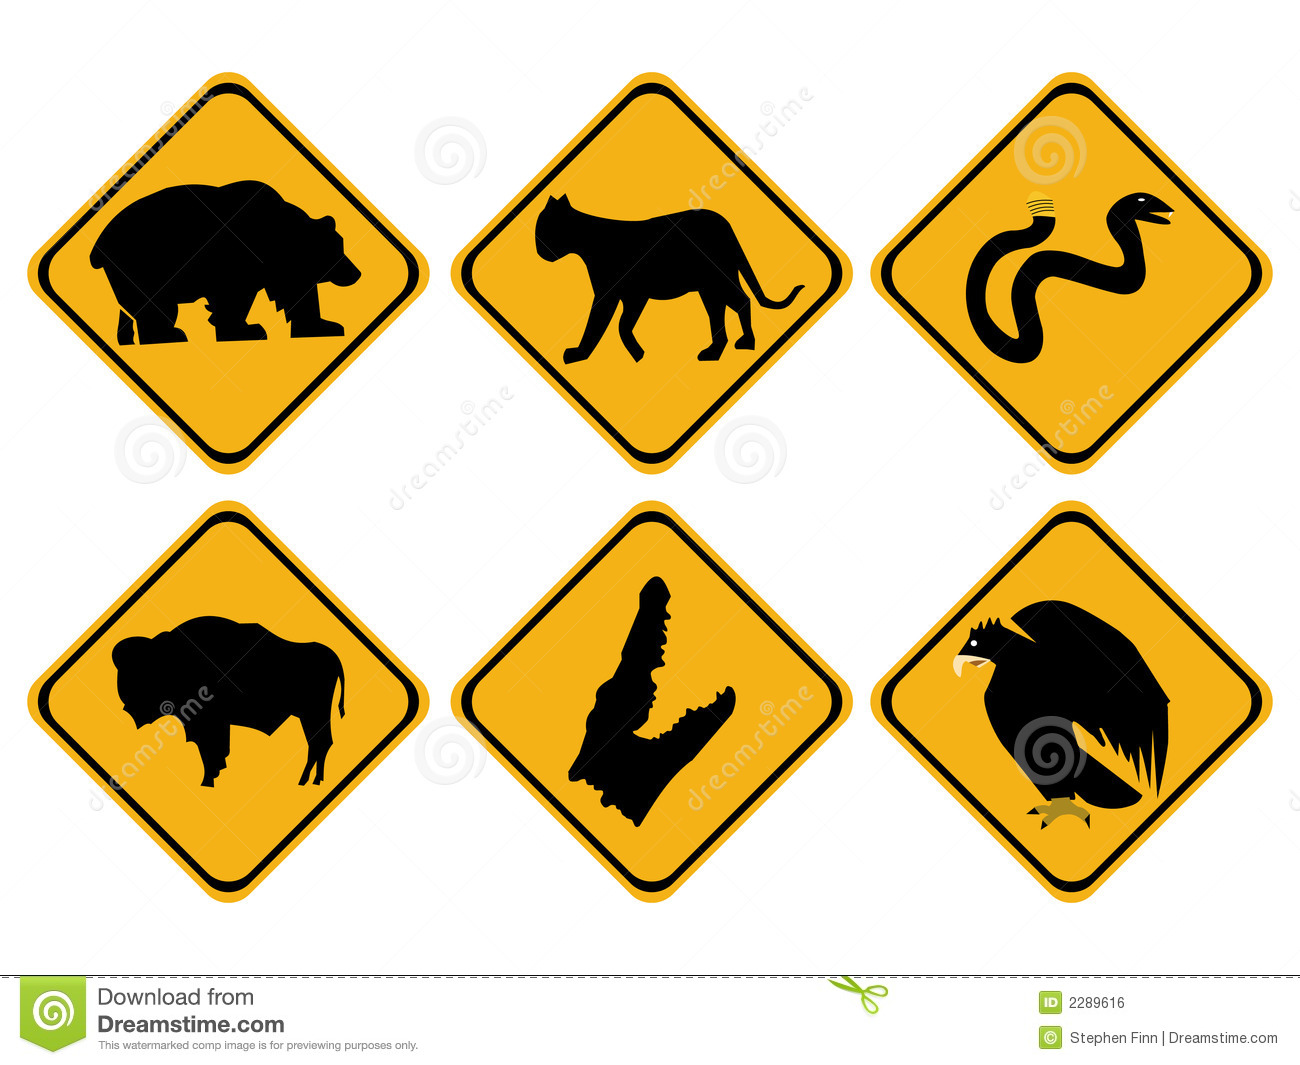 American Wildlife Signs Royalty Free Stock Image   Image  2289616